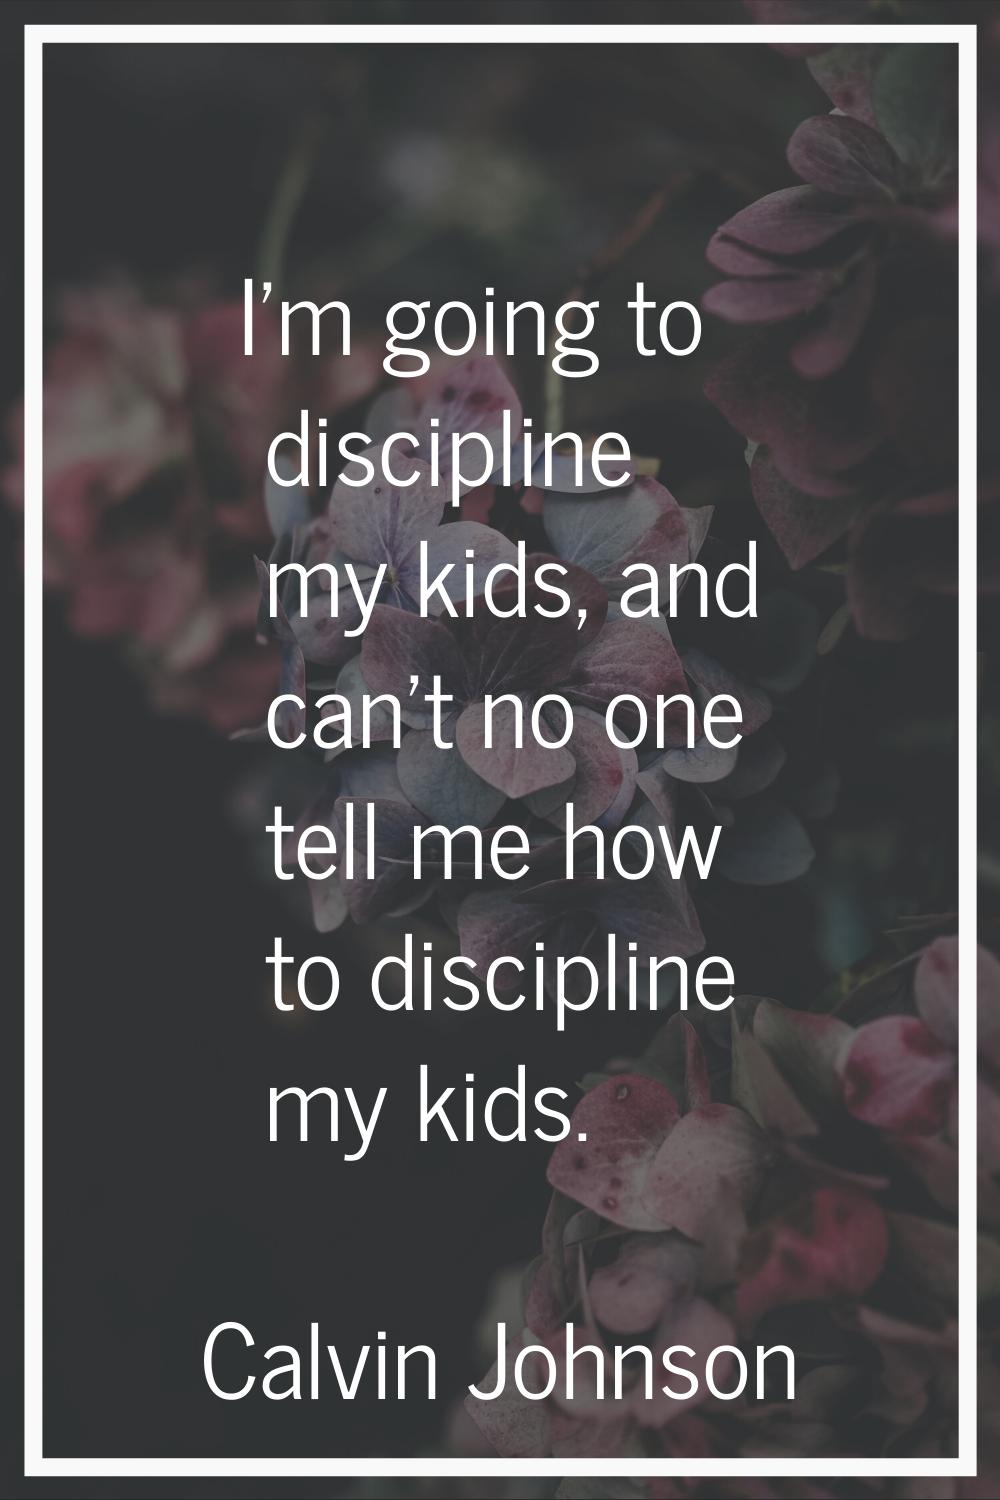 I'm going to discipline my kids, and can't no one tell me how to discipline my kids.